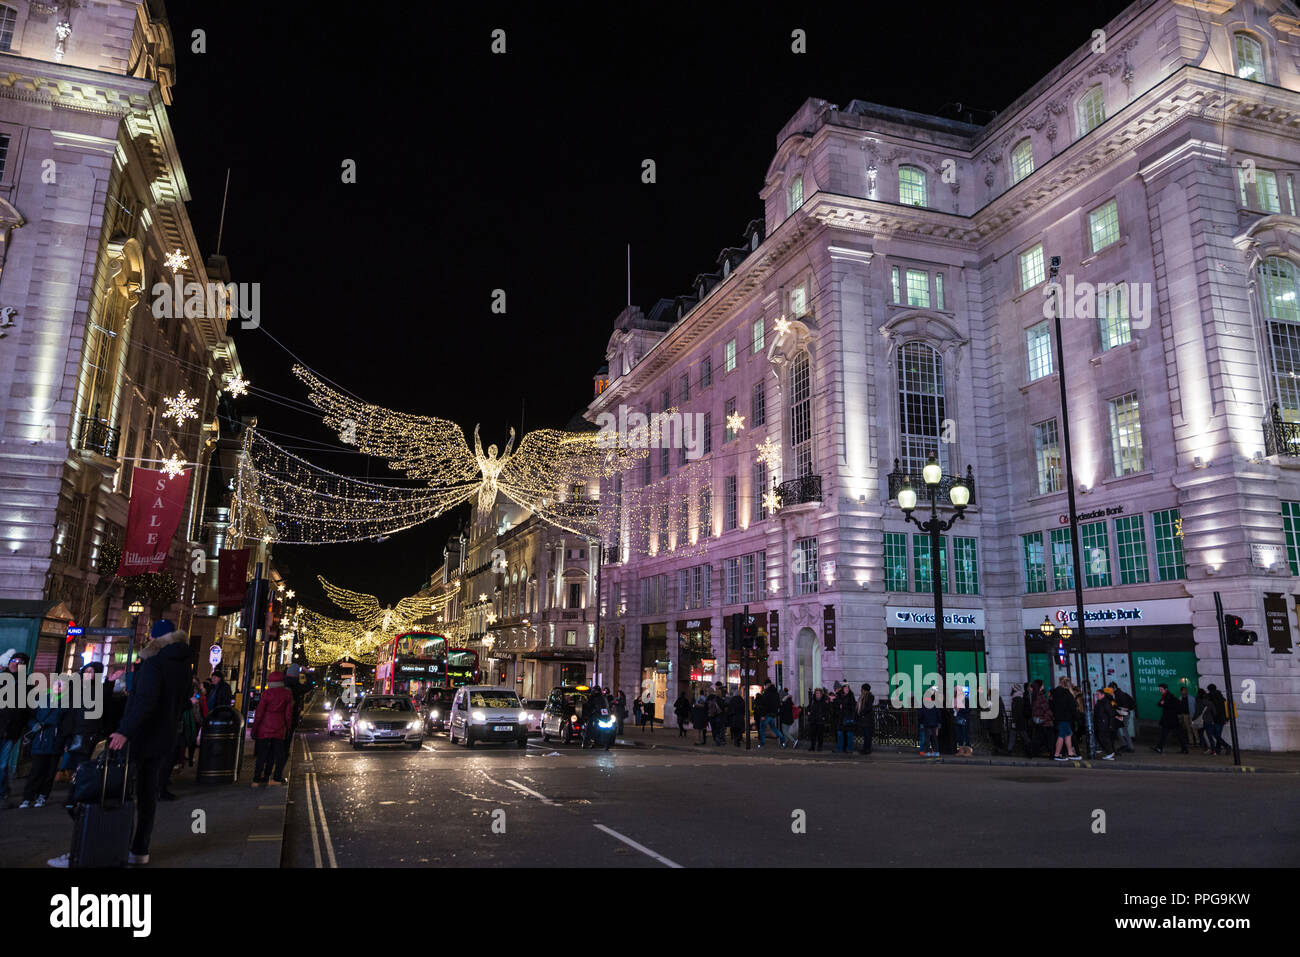 London, United Kingdom - January 3, 2018: Piccadilly Circus at night with Christmas decoration and people around in London, England, United Kingdom Stock Photo